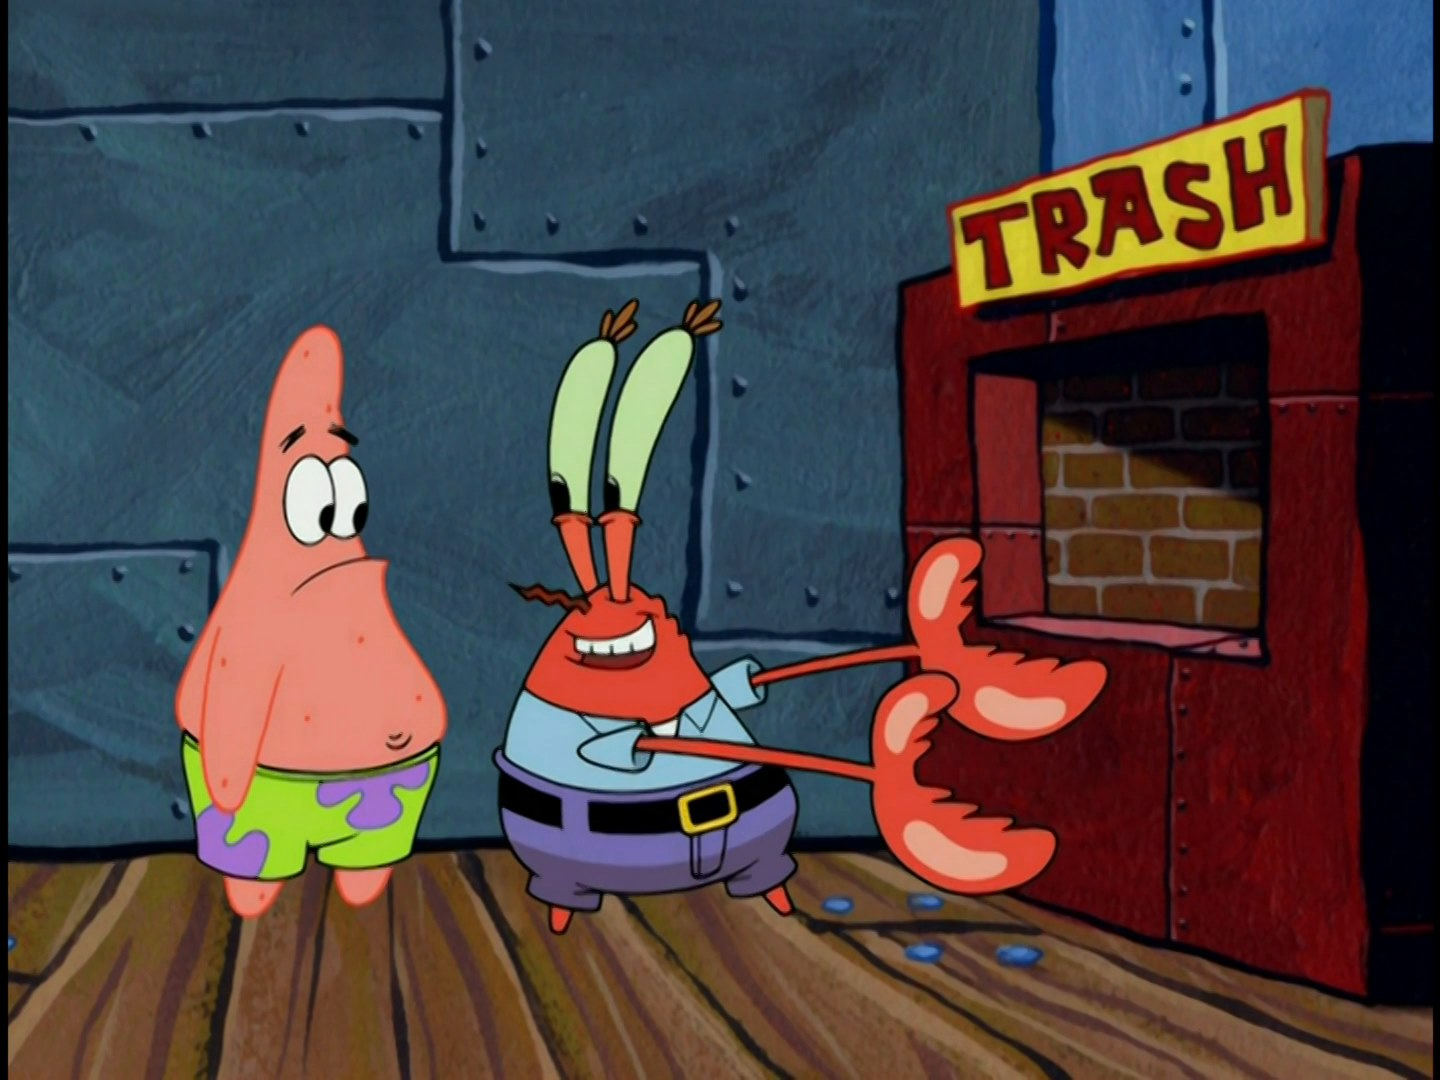 Mr. Krabs throws out the trash Blank Meme Template